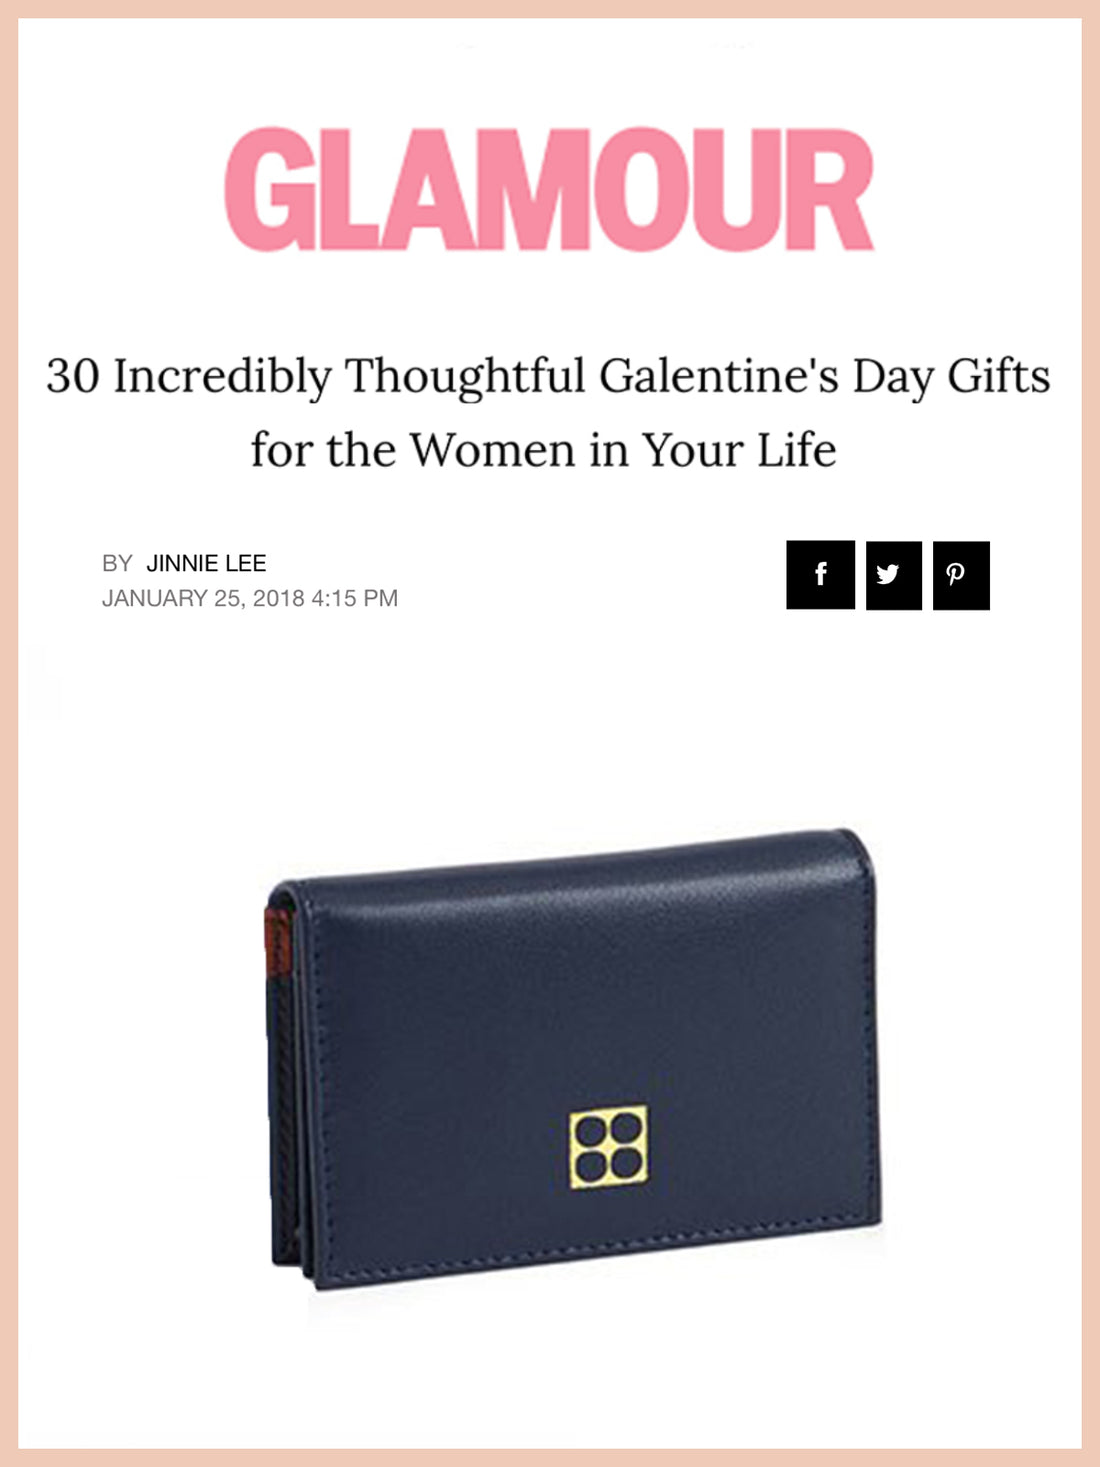 GLAMOUR, 30 Incredibly Thoughtful Gifts for the Women in Your Life